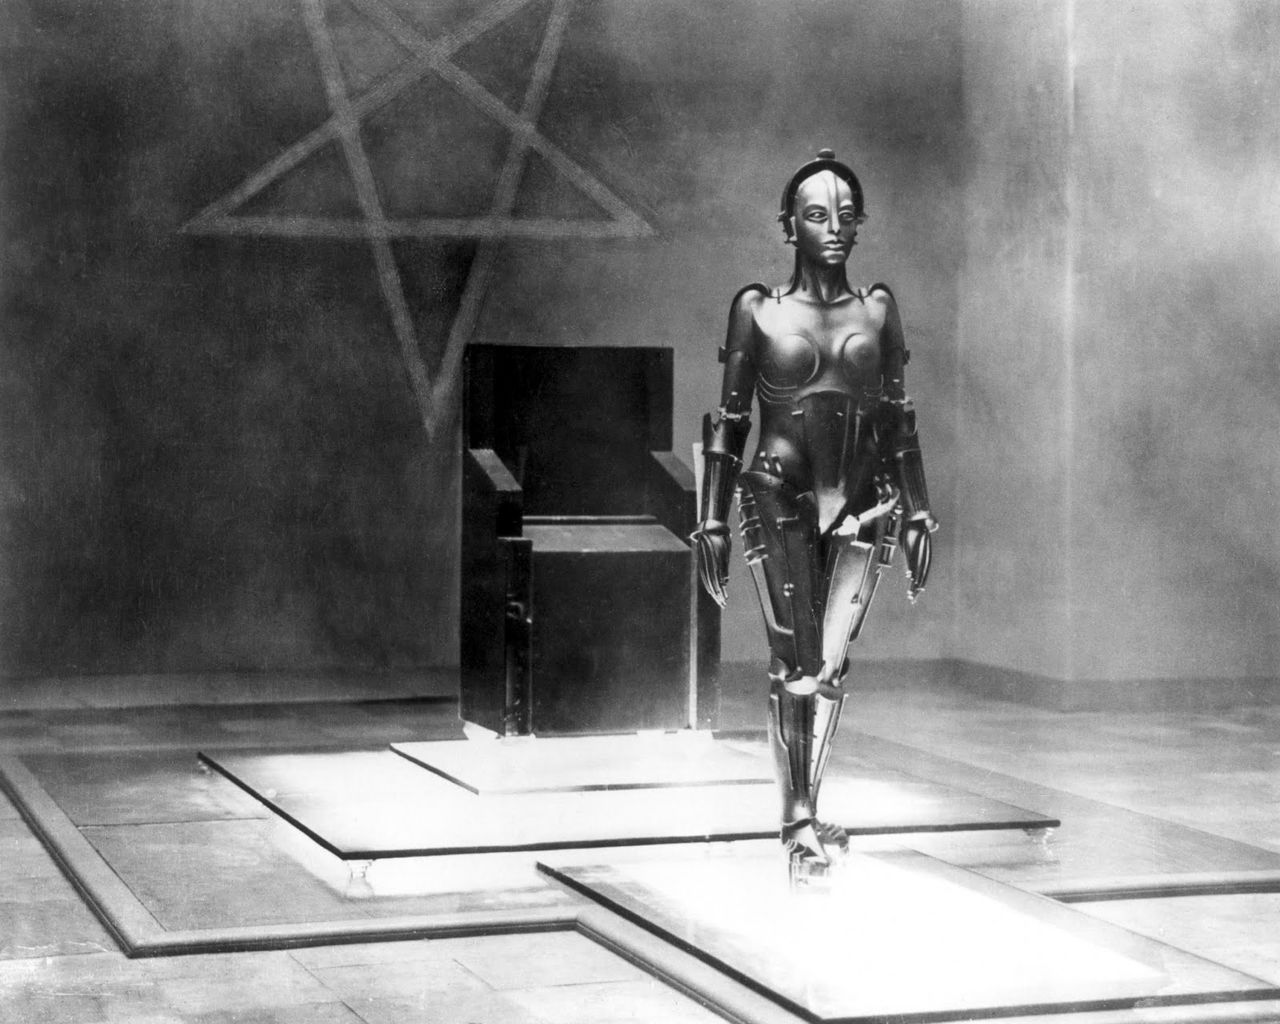 German actress Brigitte Helm (1906 - 1996) as the "Maschinenmensch," the robot double of Maria, in 1927's classic film "Metropolis," directed by Fritz Lang.